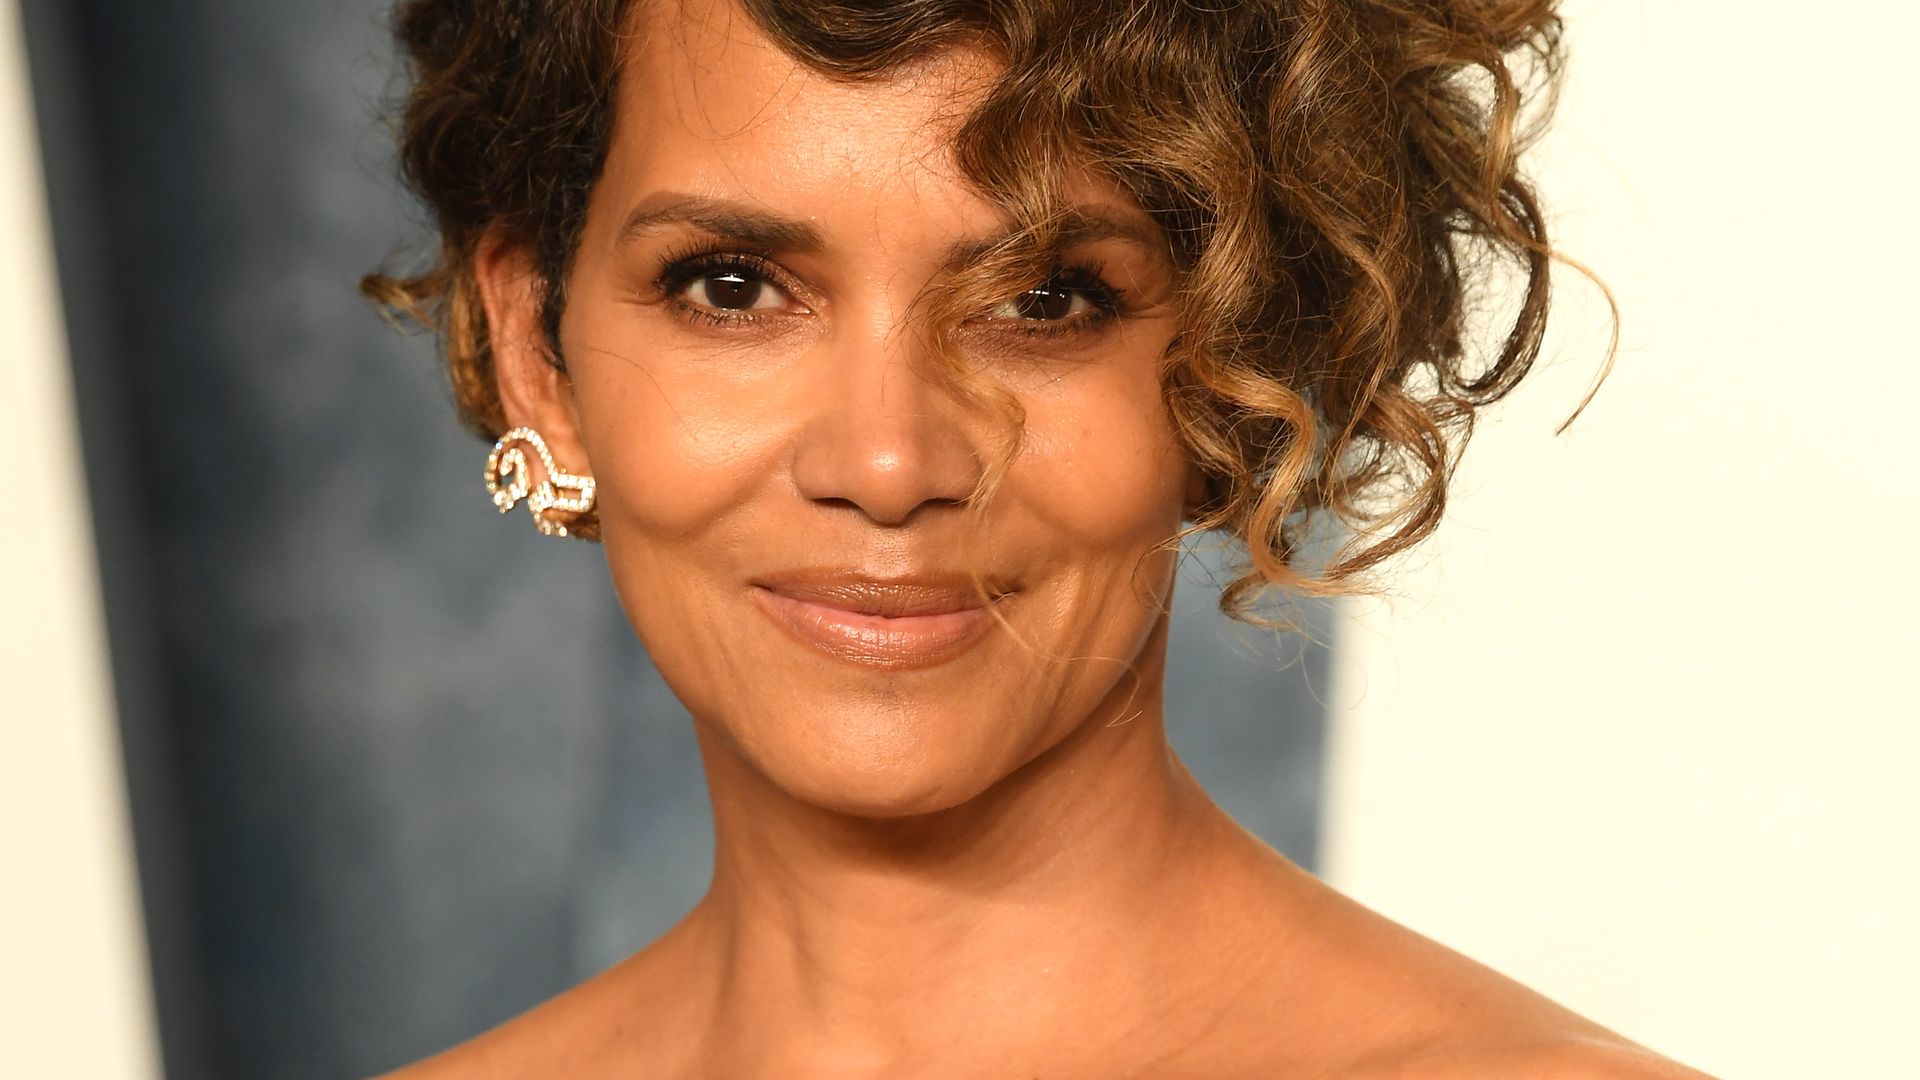 Halle Berry on the red carpet 